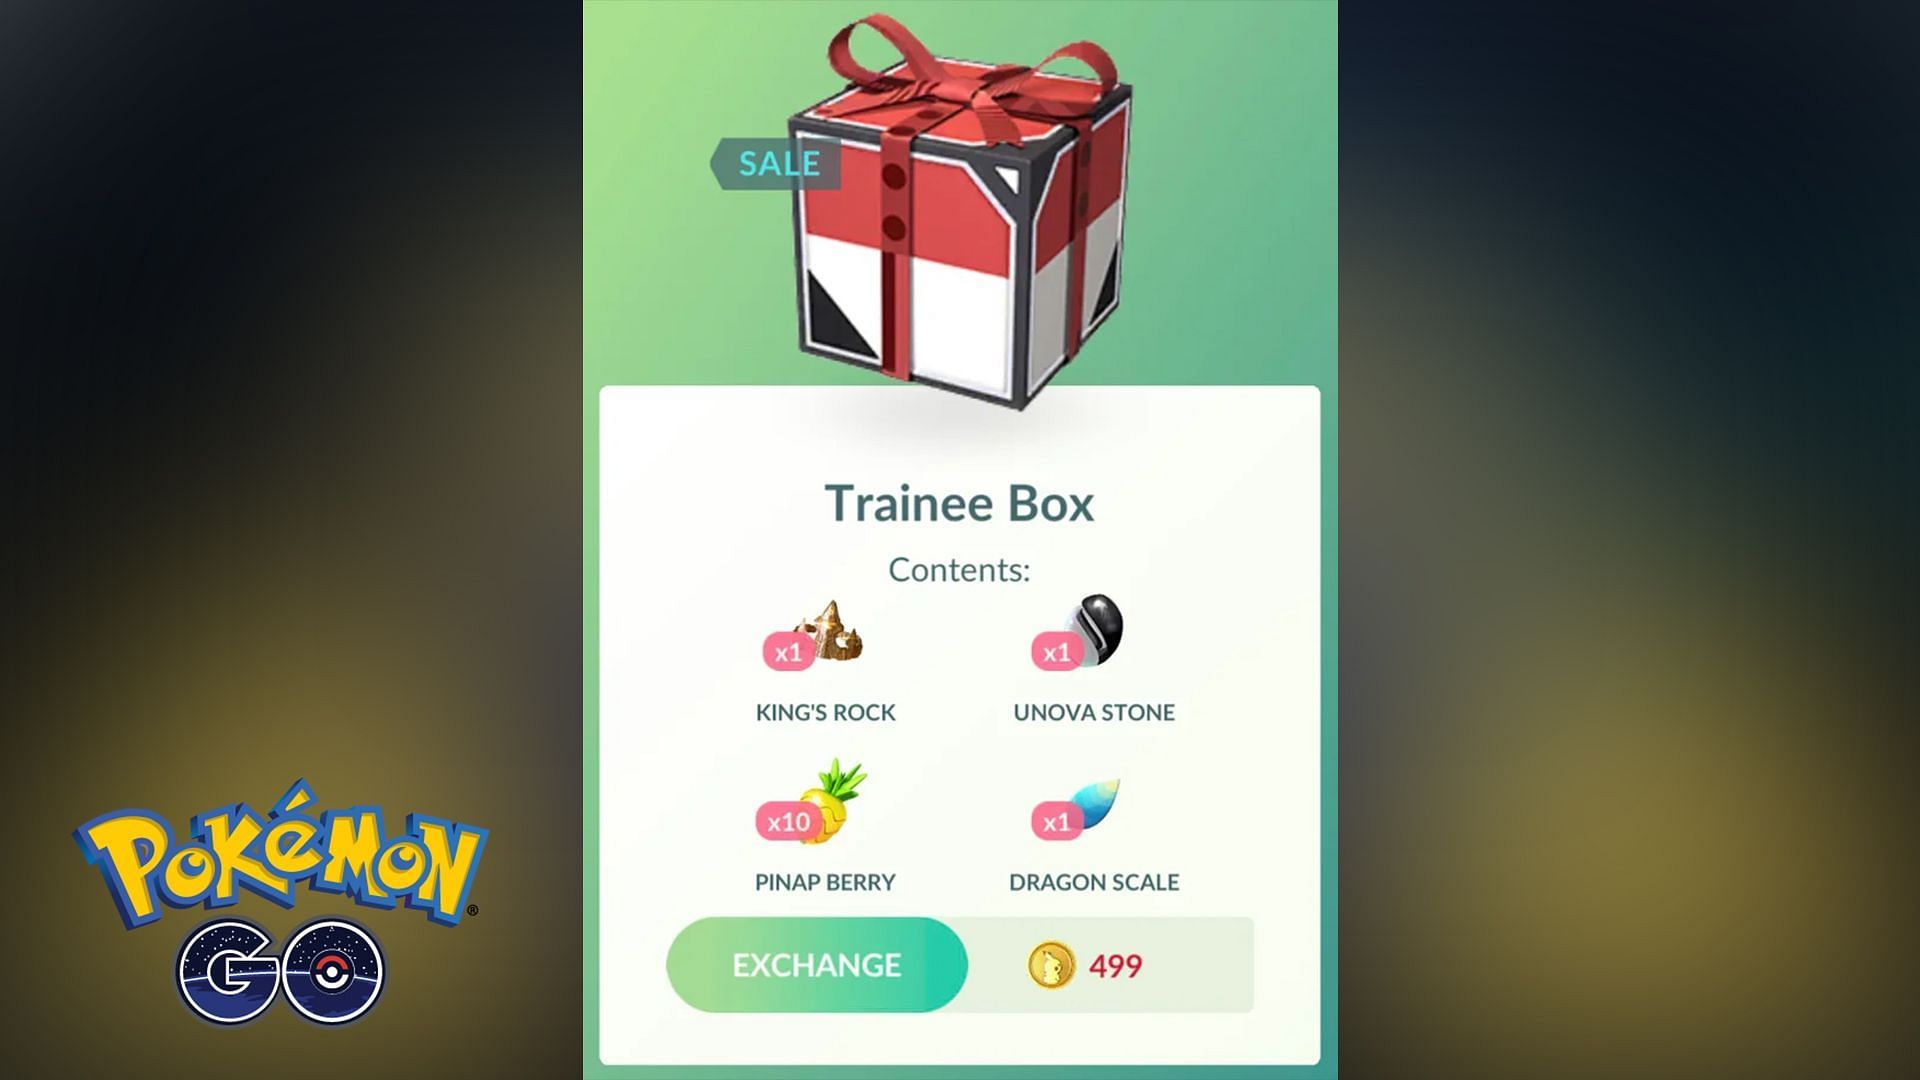 "Please delete the game immediately": Pokemon GO players discuss Trainee Box in-game